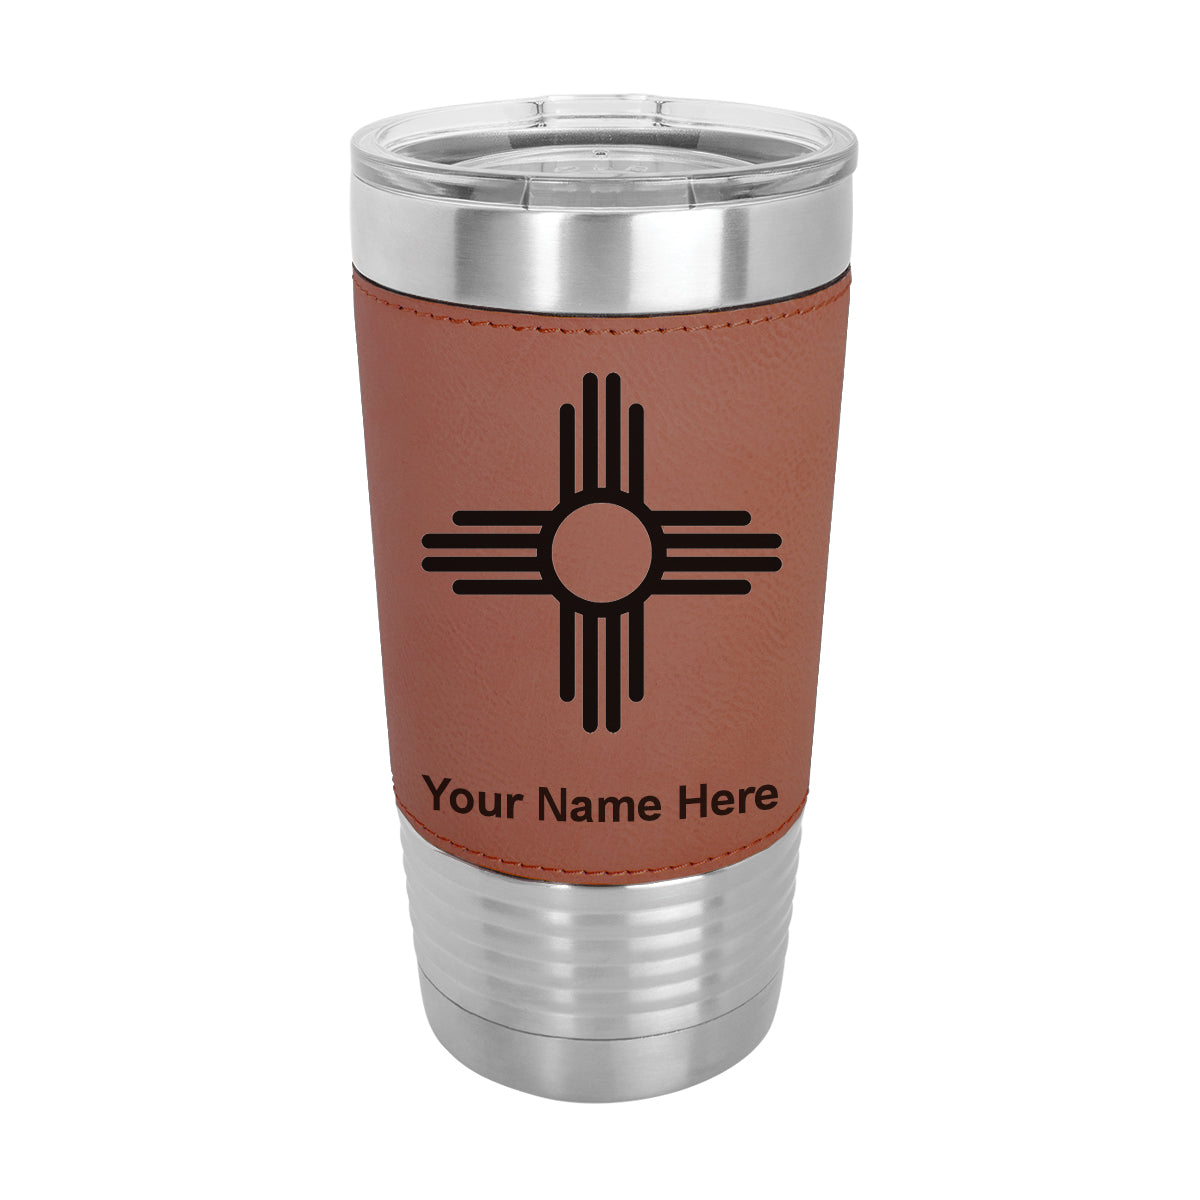 20oz Faux Leather Tumbler Mug, Flag of New Mexico, Personalized Engraving Included - LaserGram Custom Engraved Gifts